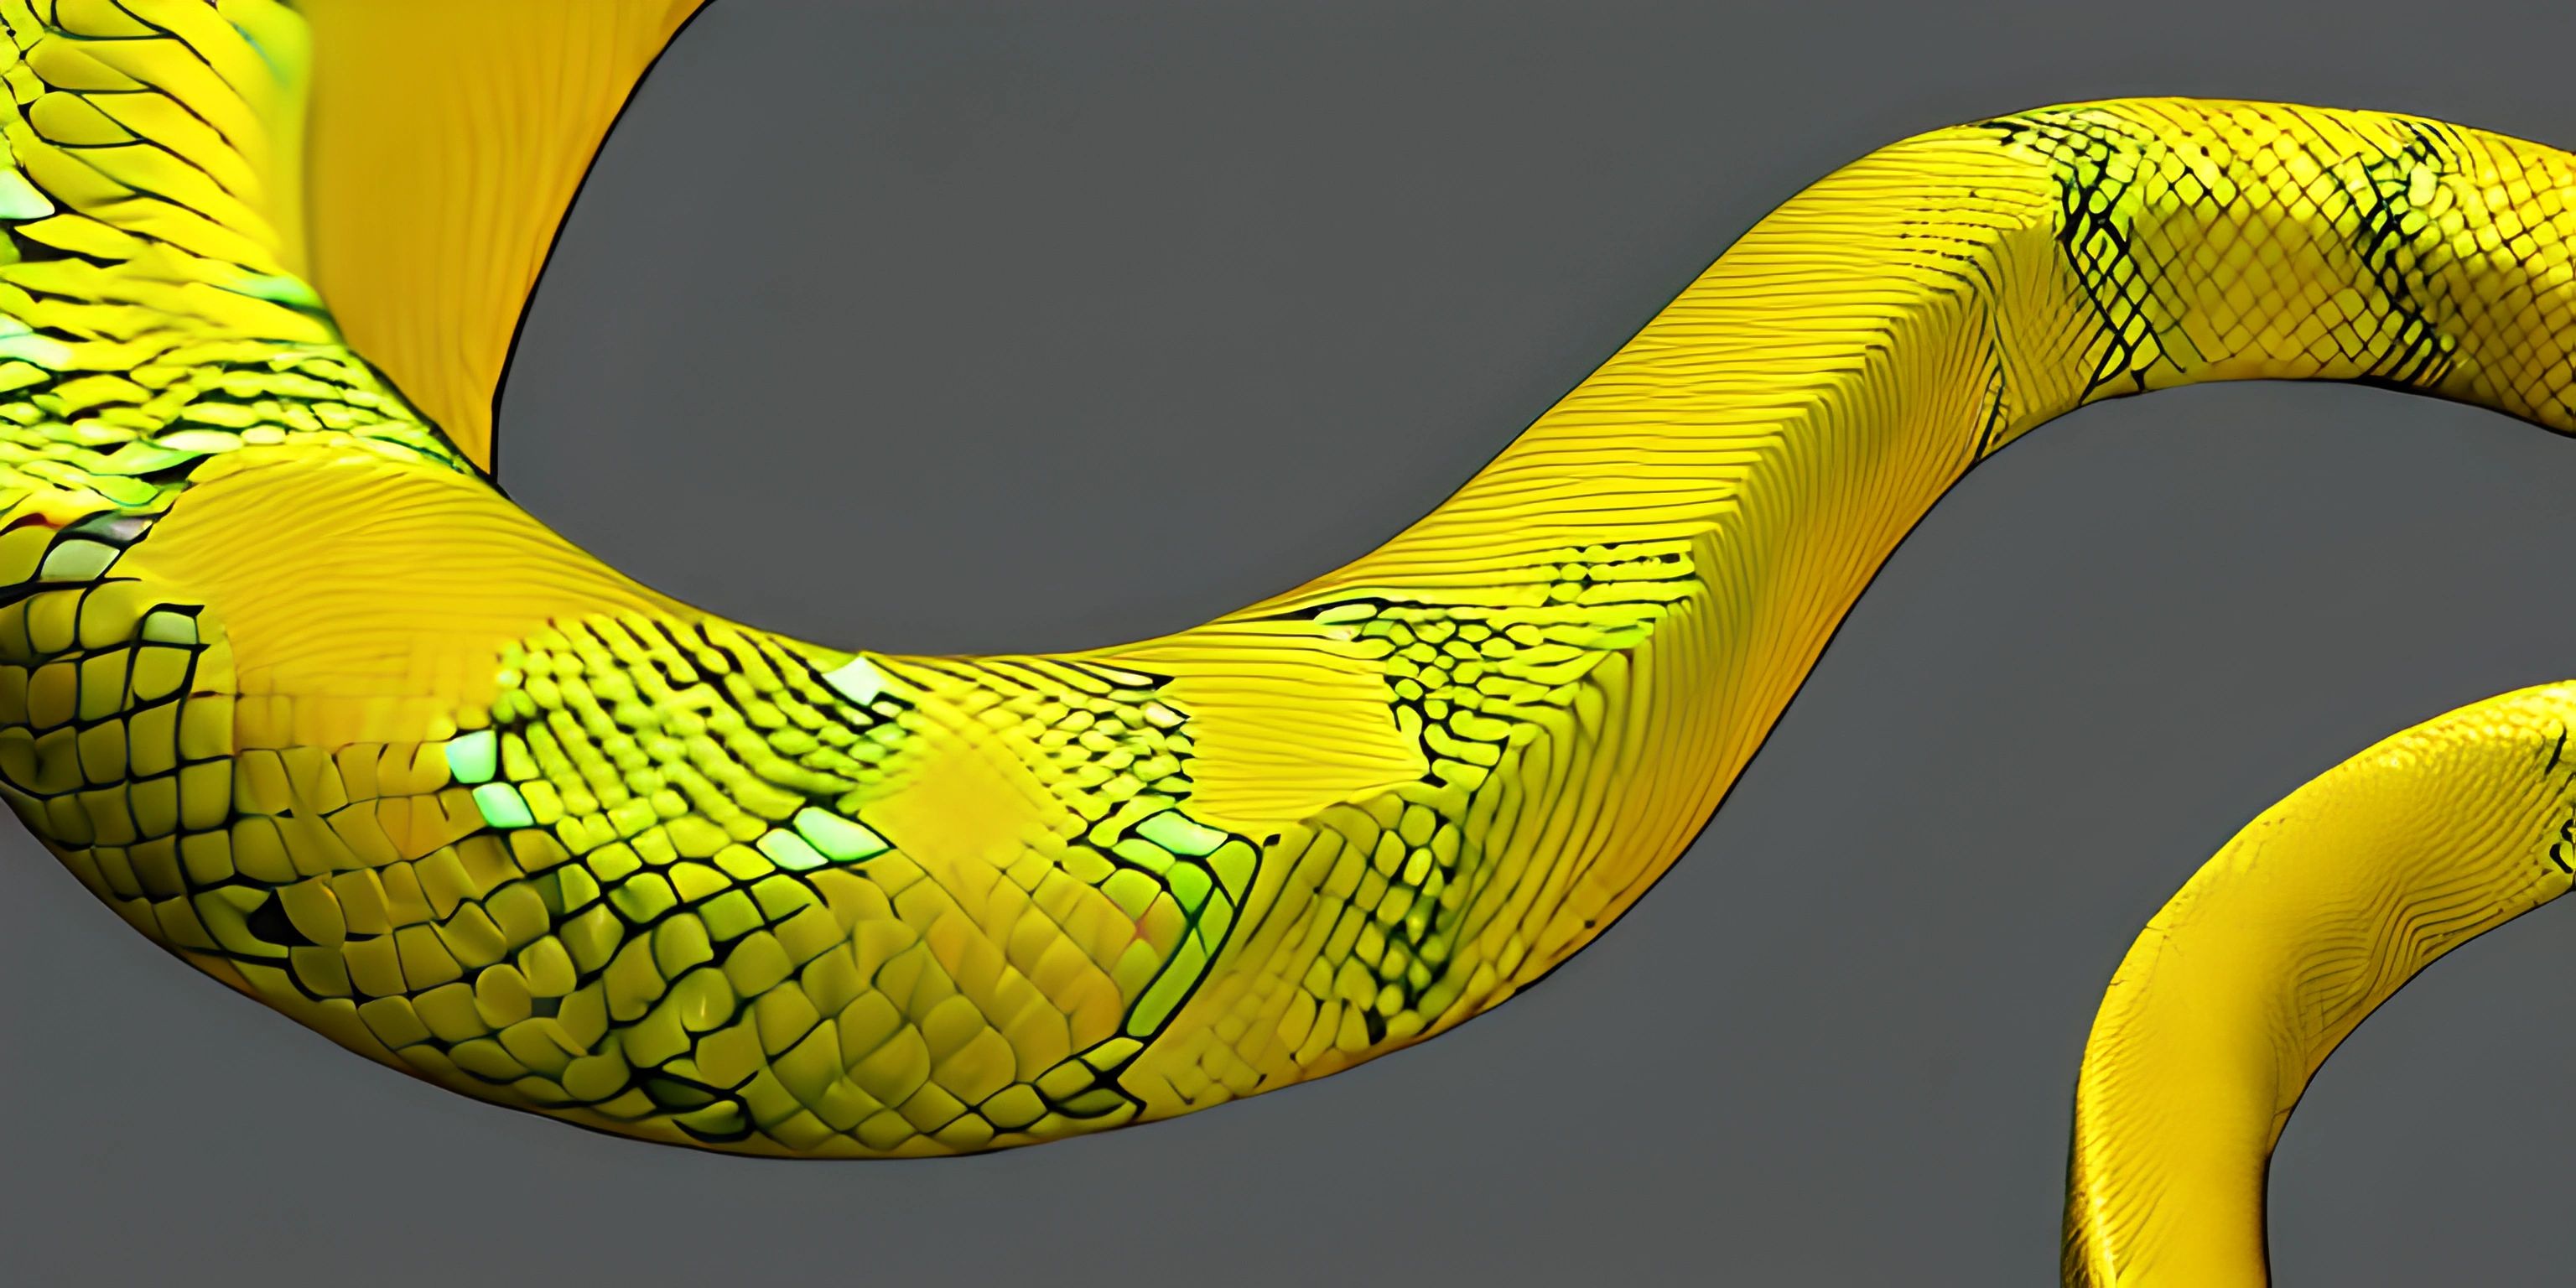 the snake is eating it's tail in front of the dark grey background and to the left are two large yellow snakes